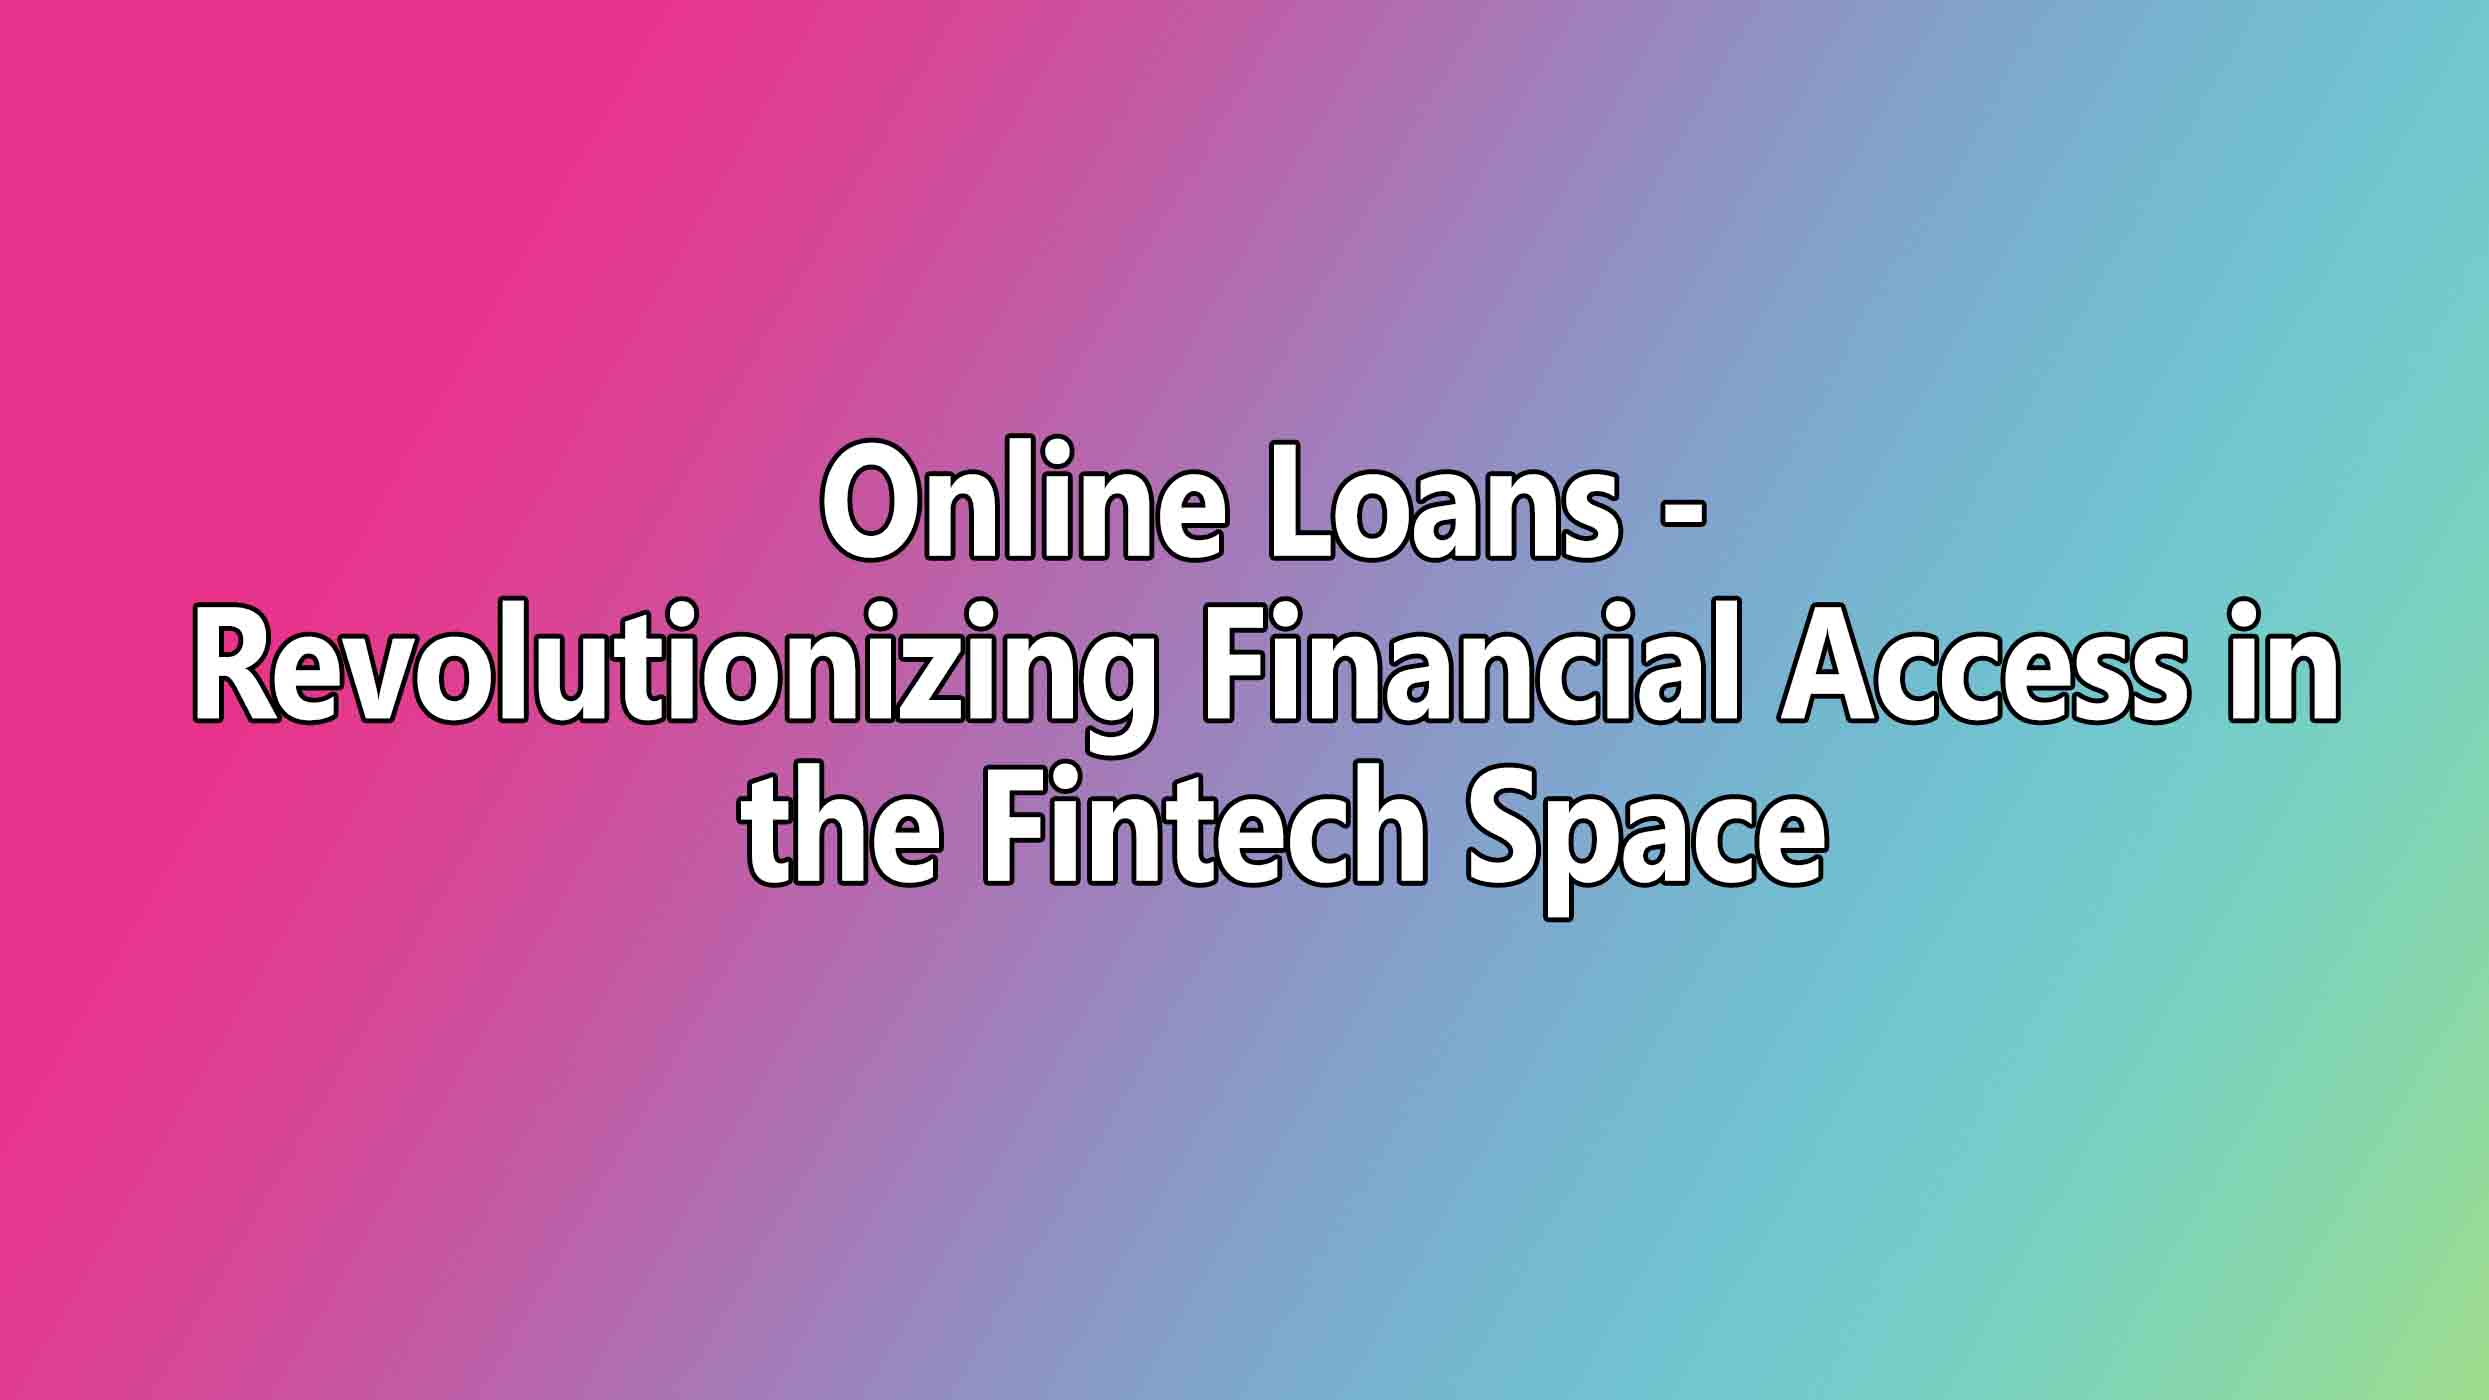 Online Loans - Revolutionizing Financial Access in the Fintech Space